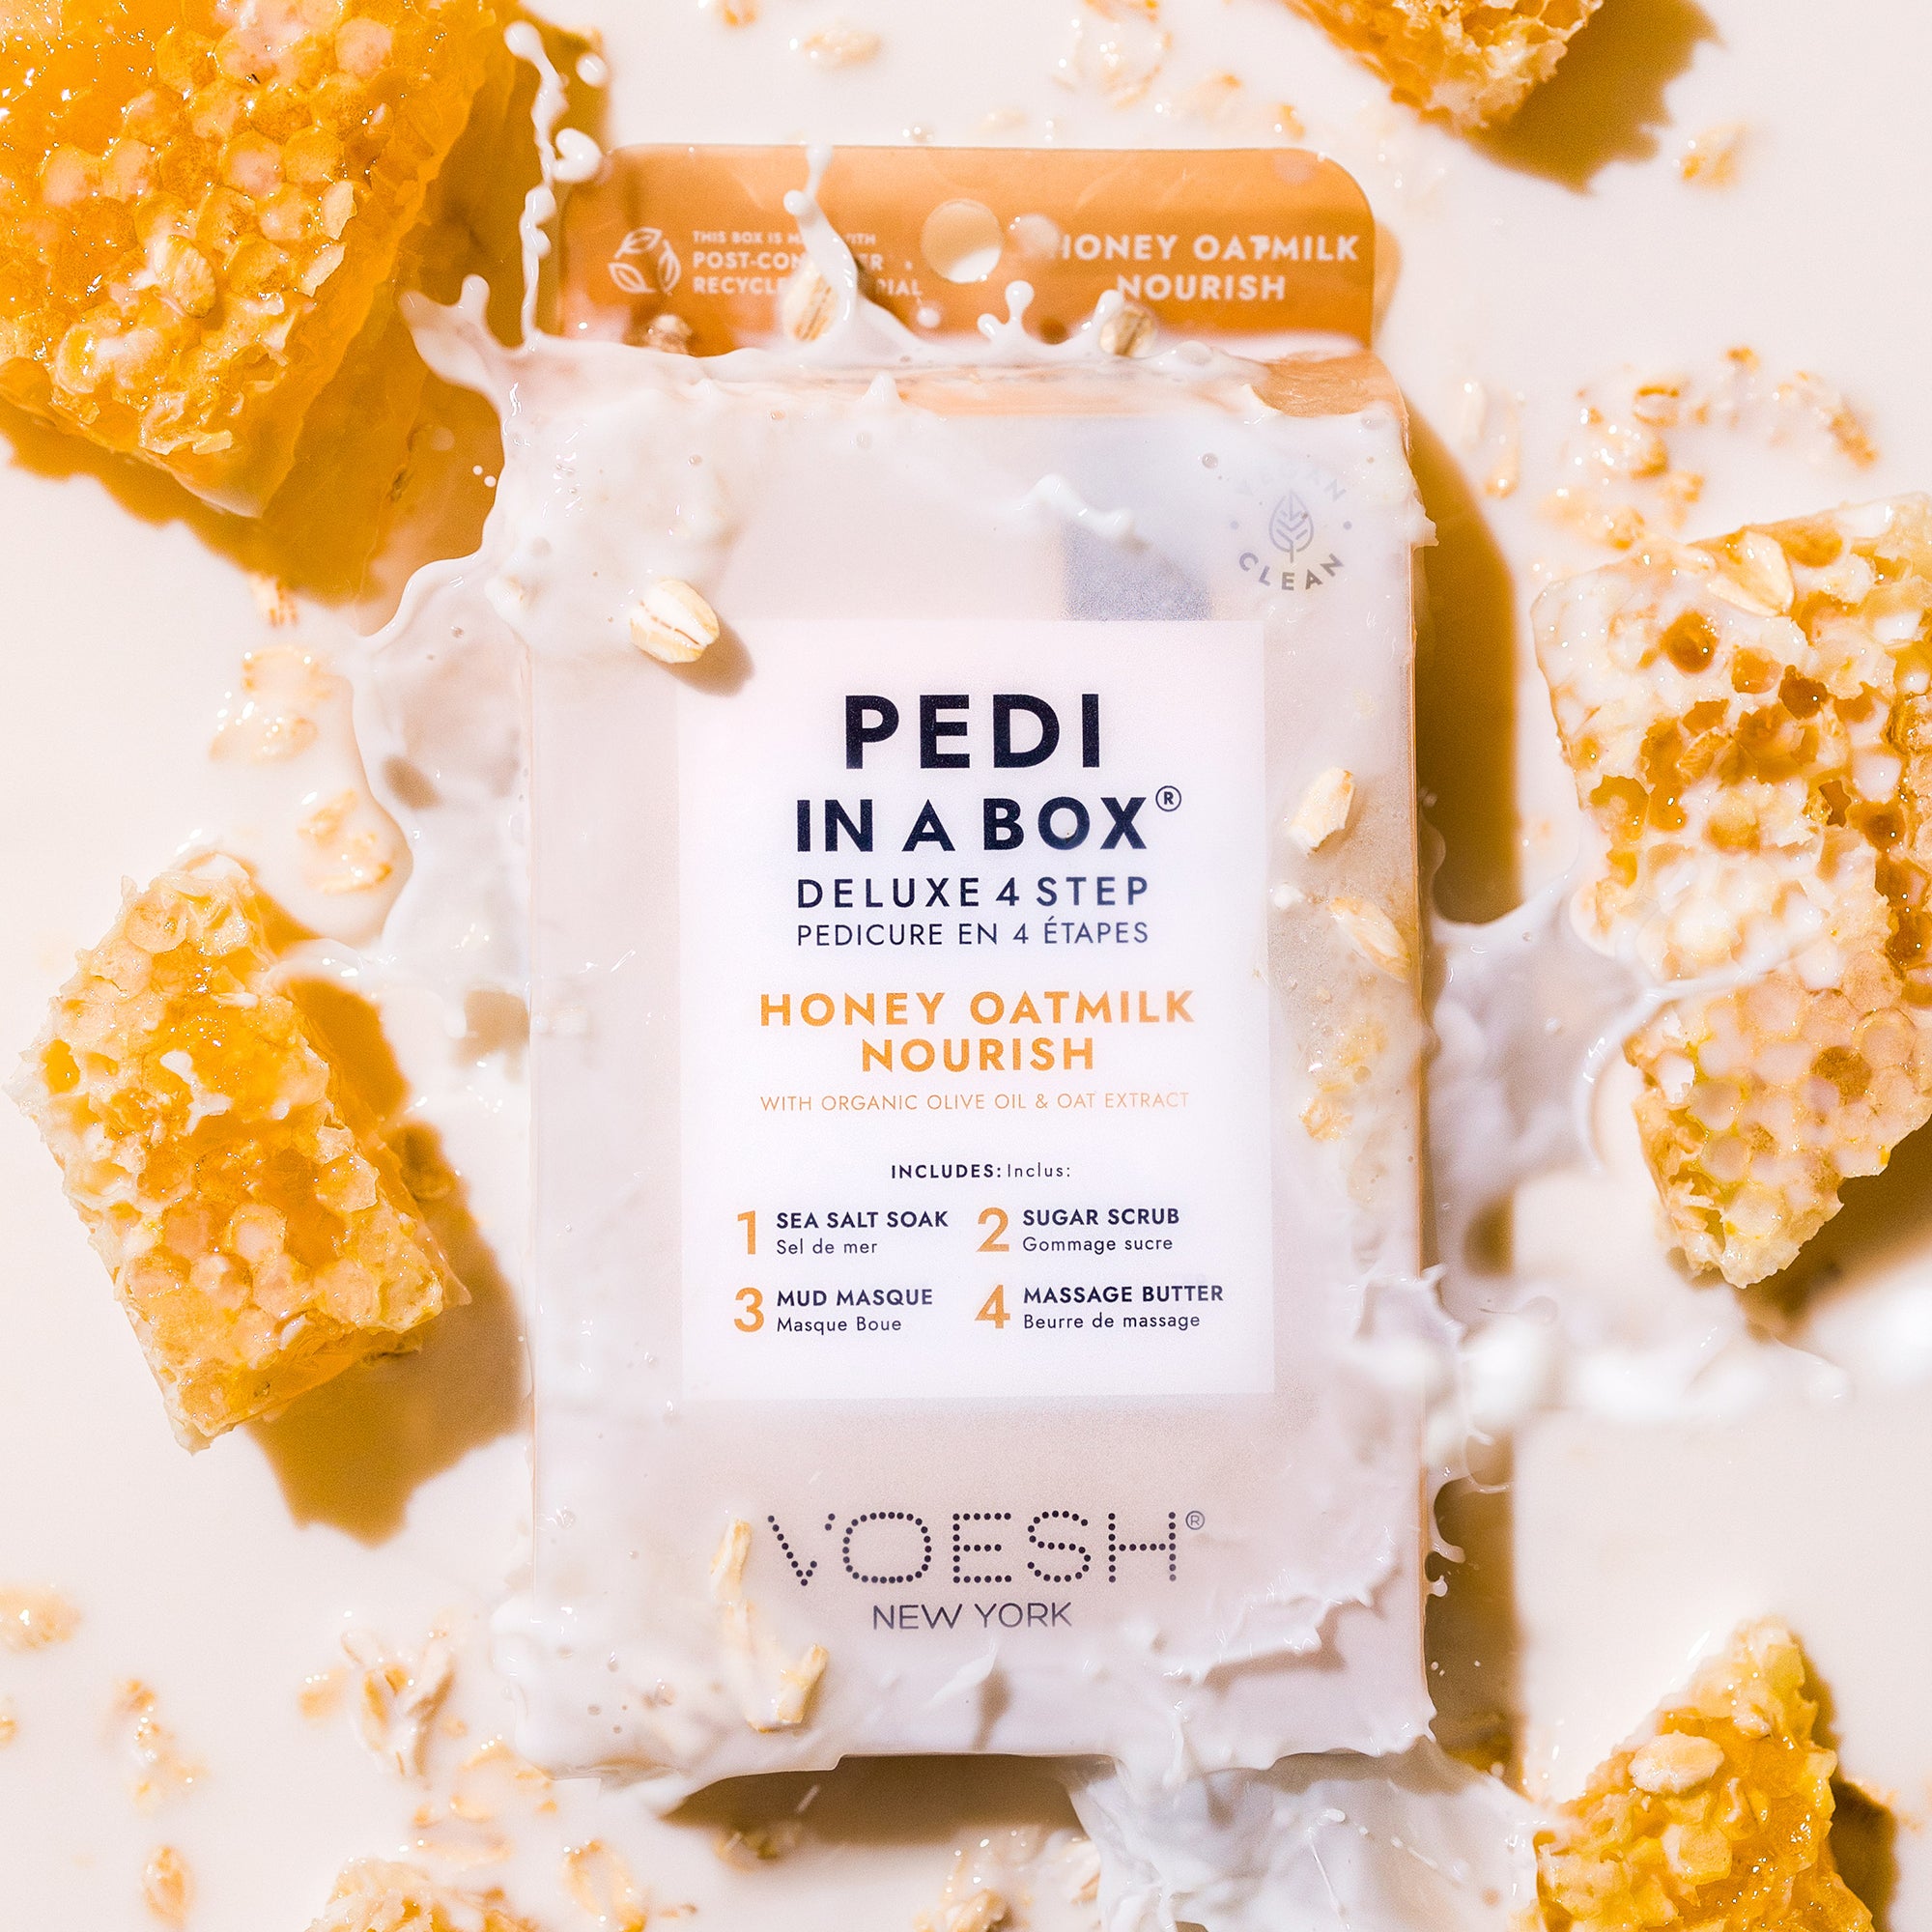 Honey Oatmilk Nourish Pedi in a Box Deluxe 4 Step with oatmilk splashing on the top, and honeycombs surrounding it